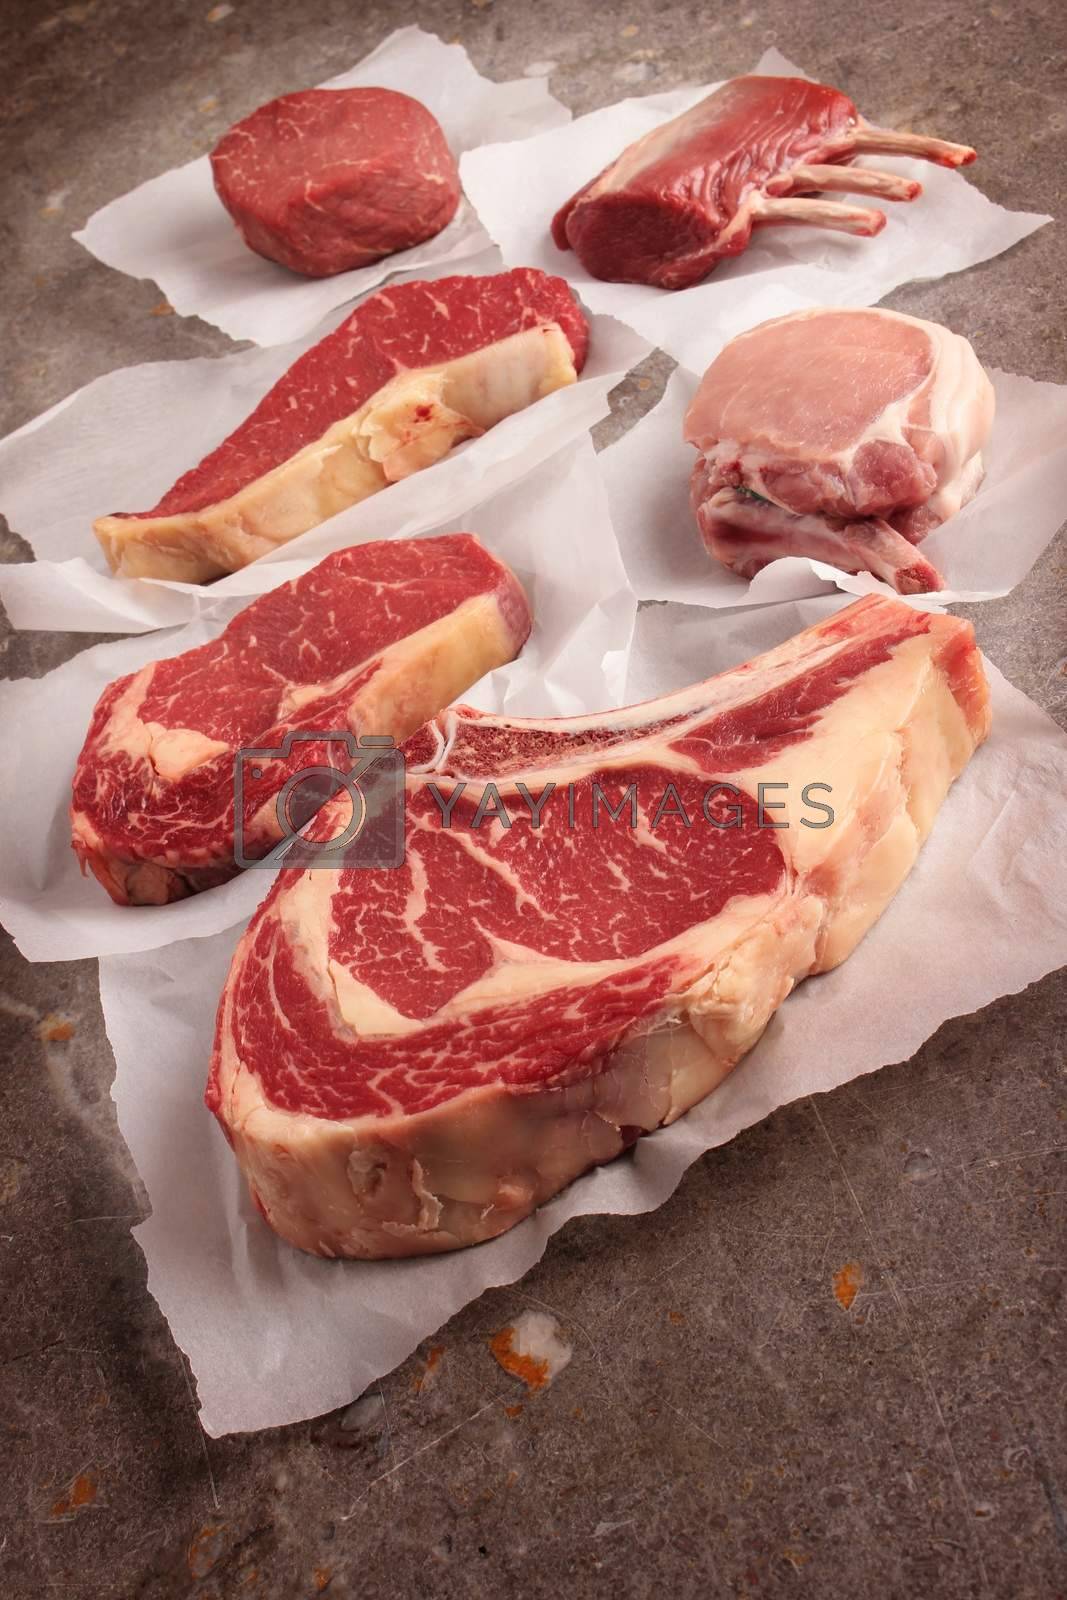 Royalty free image of prime meat cuts by neil_langan